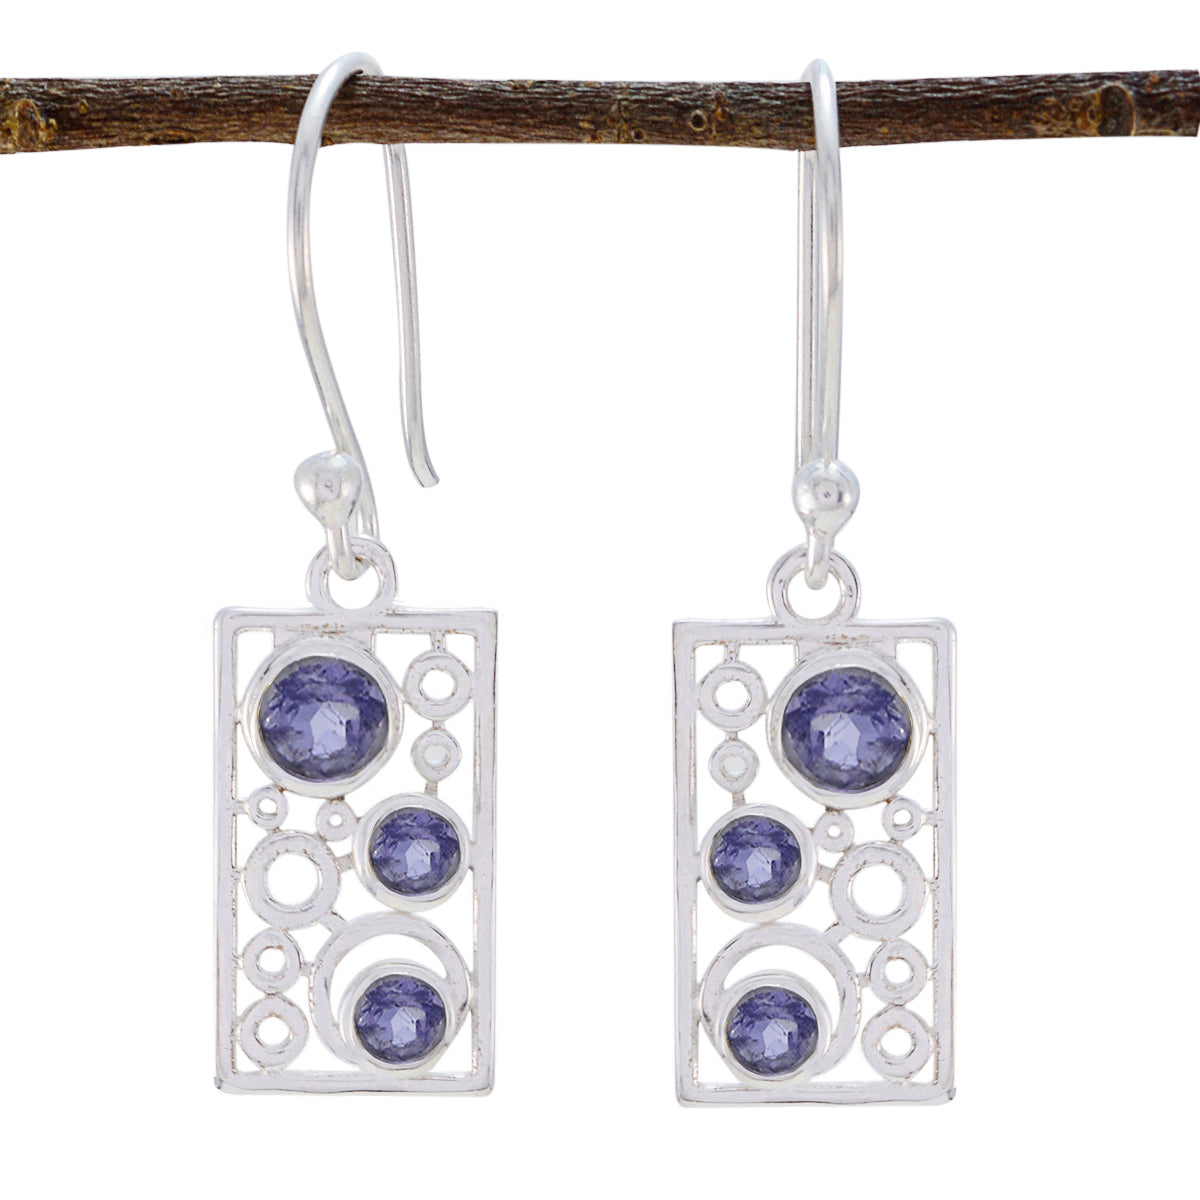 Riyo Natural Gemstone round Faceted Nevy Blue Iolite Silver Earring gift for good Friday